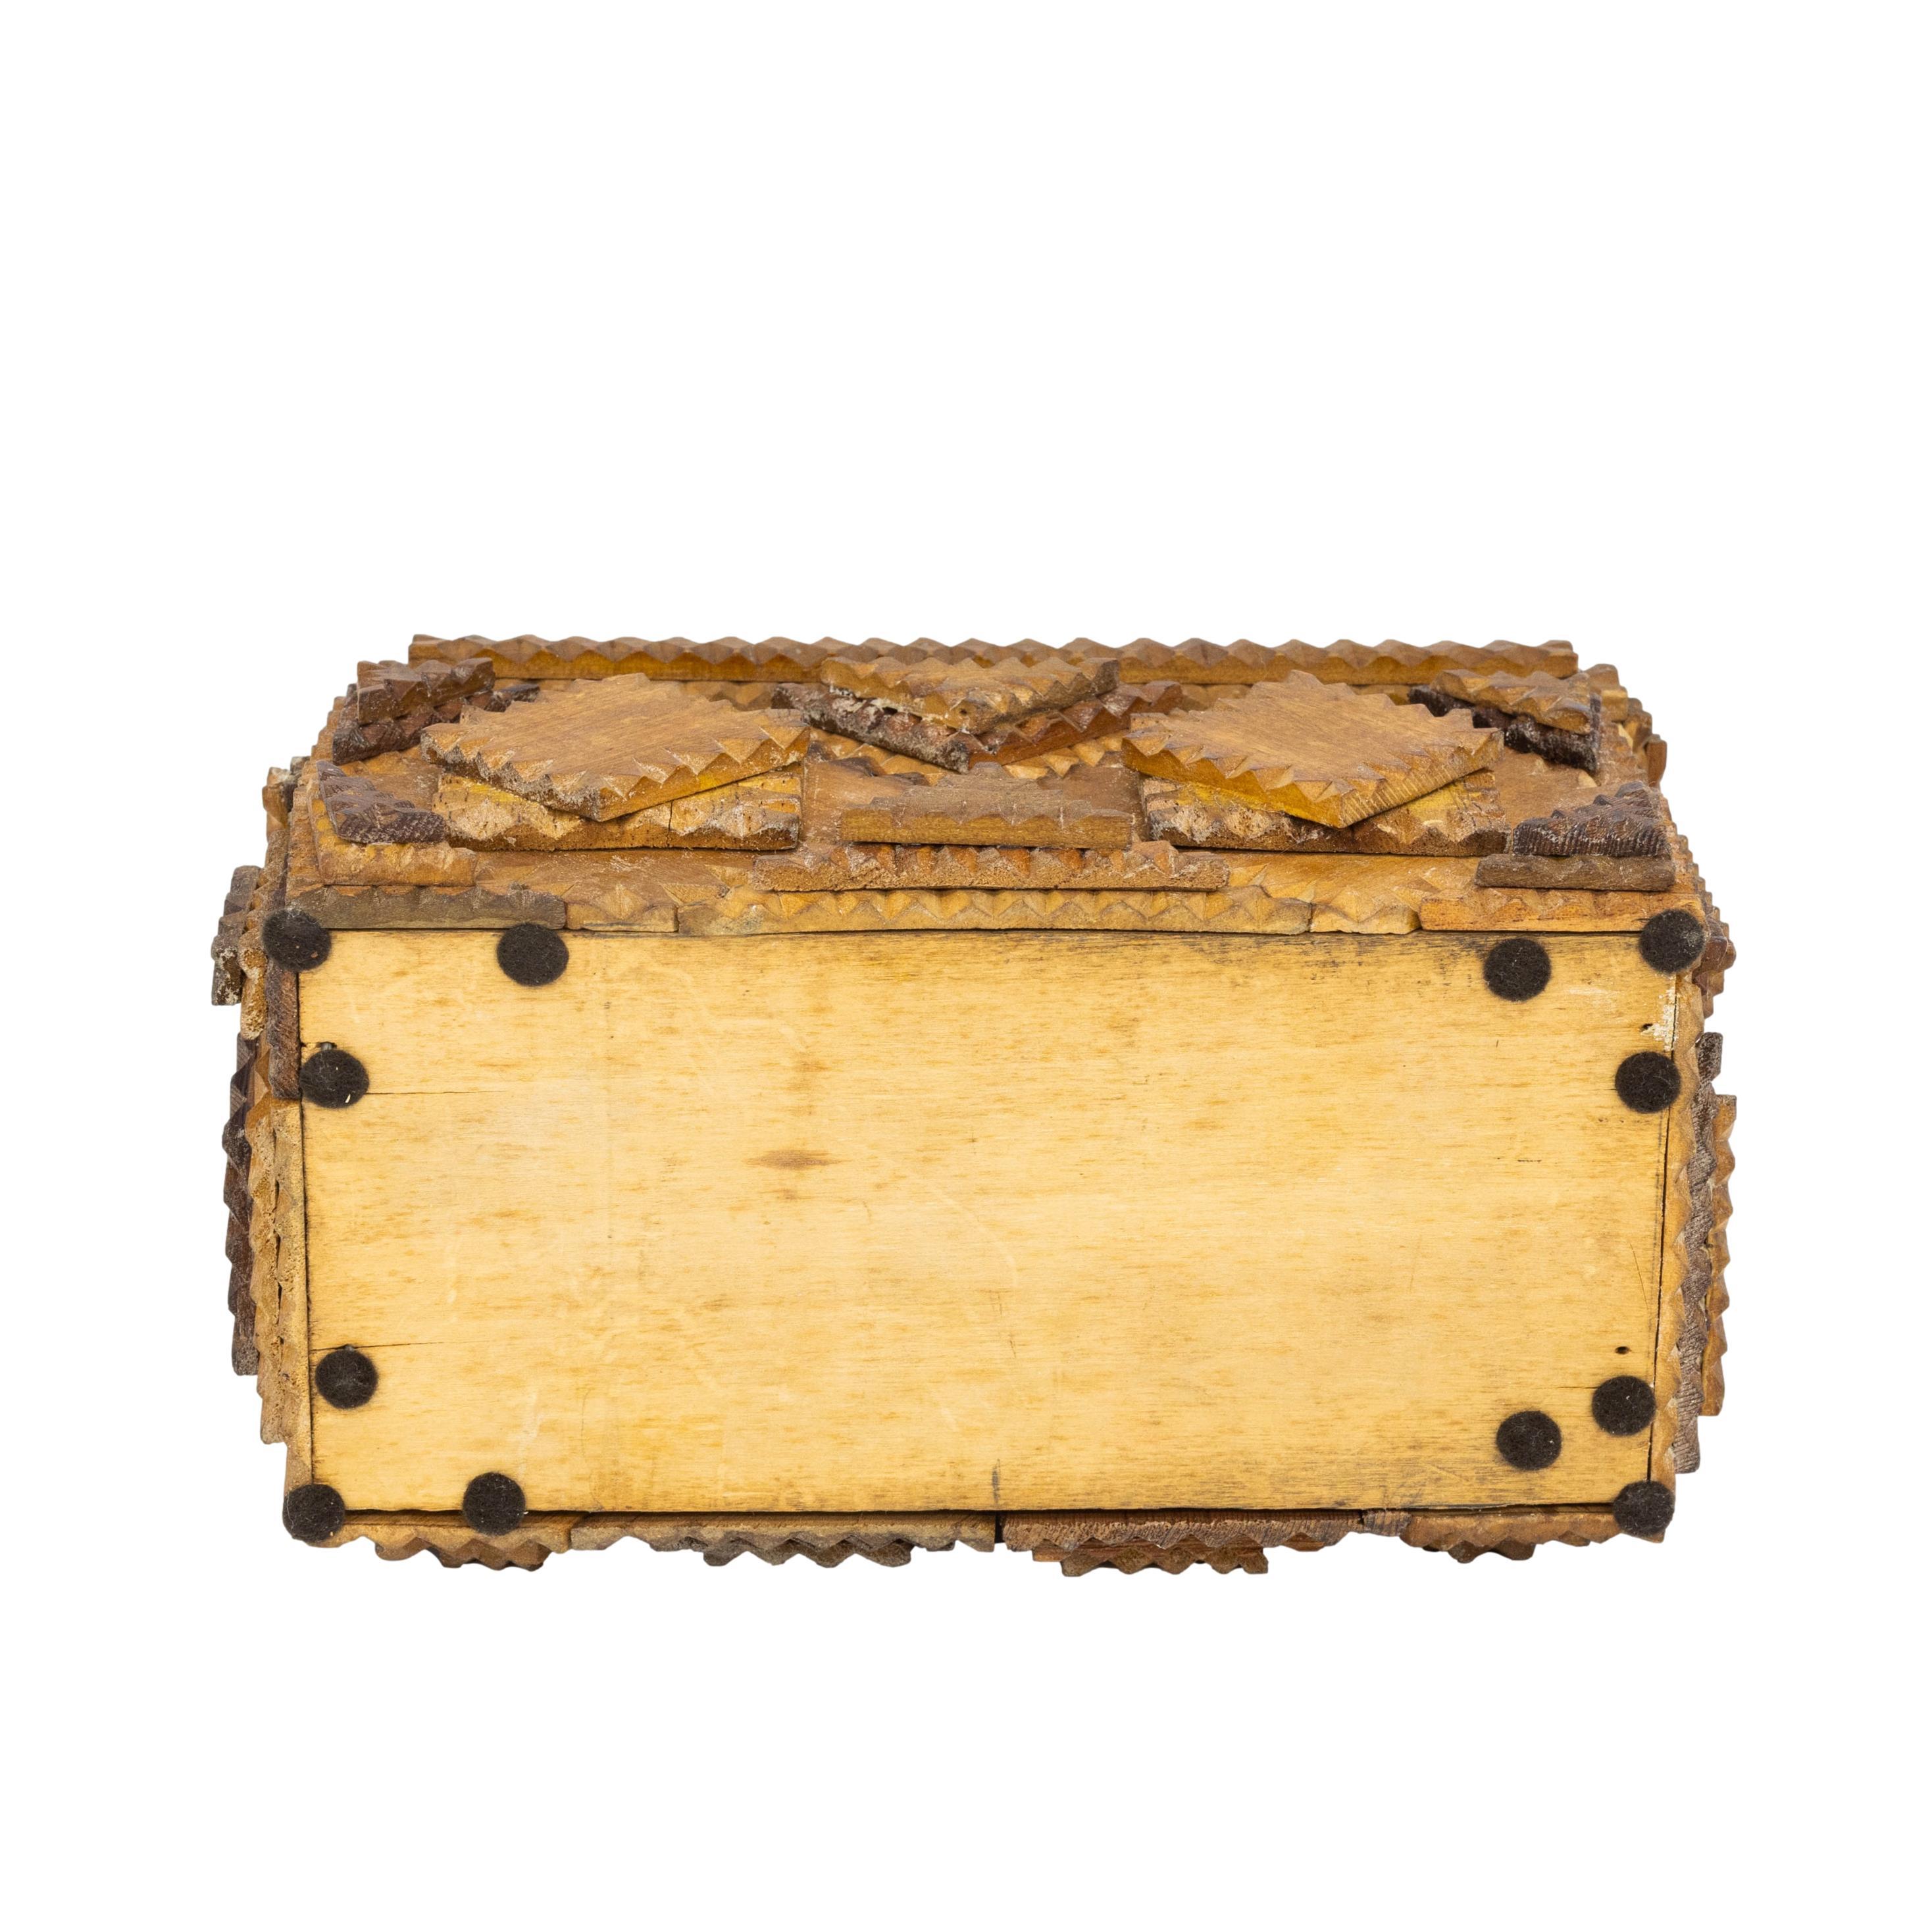 Tramp Art Lift-Top Box with Notched and Layered Geometrical Design, ca. 1920 For Sale 1